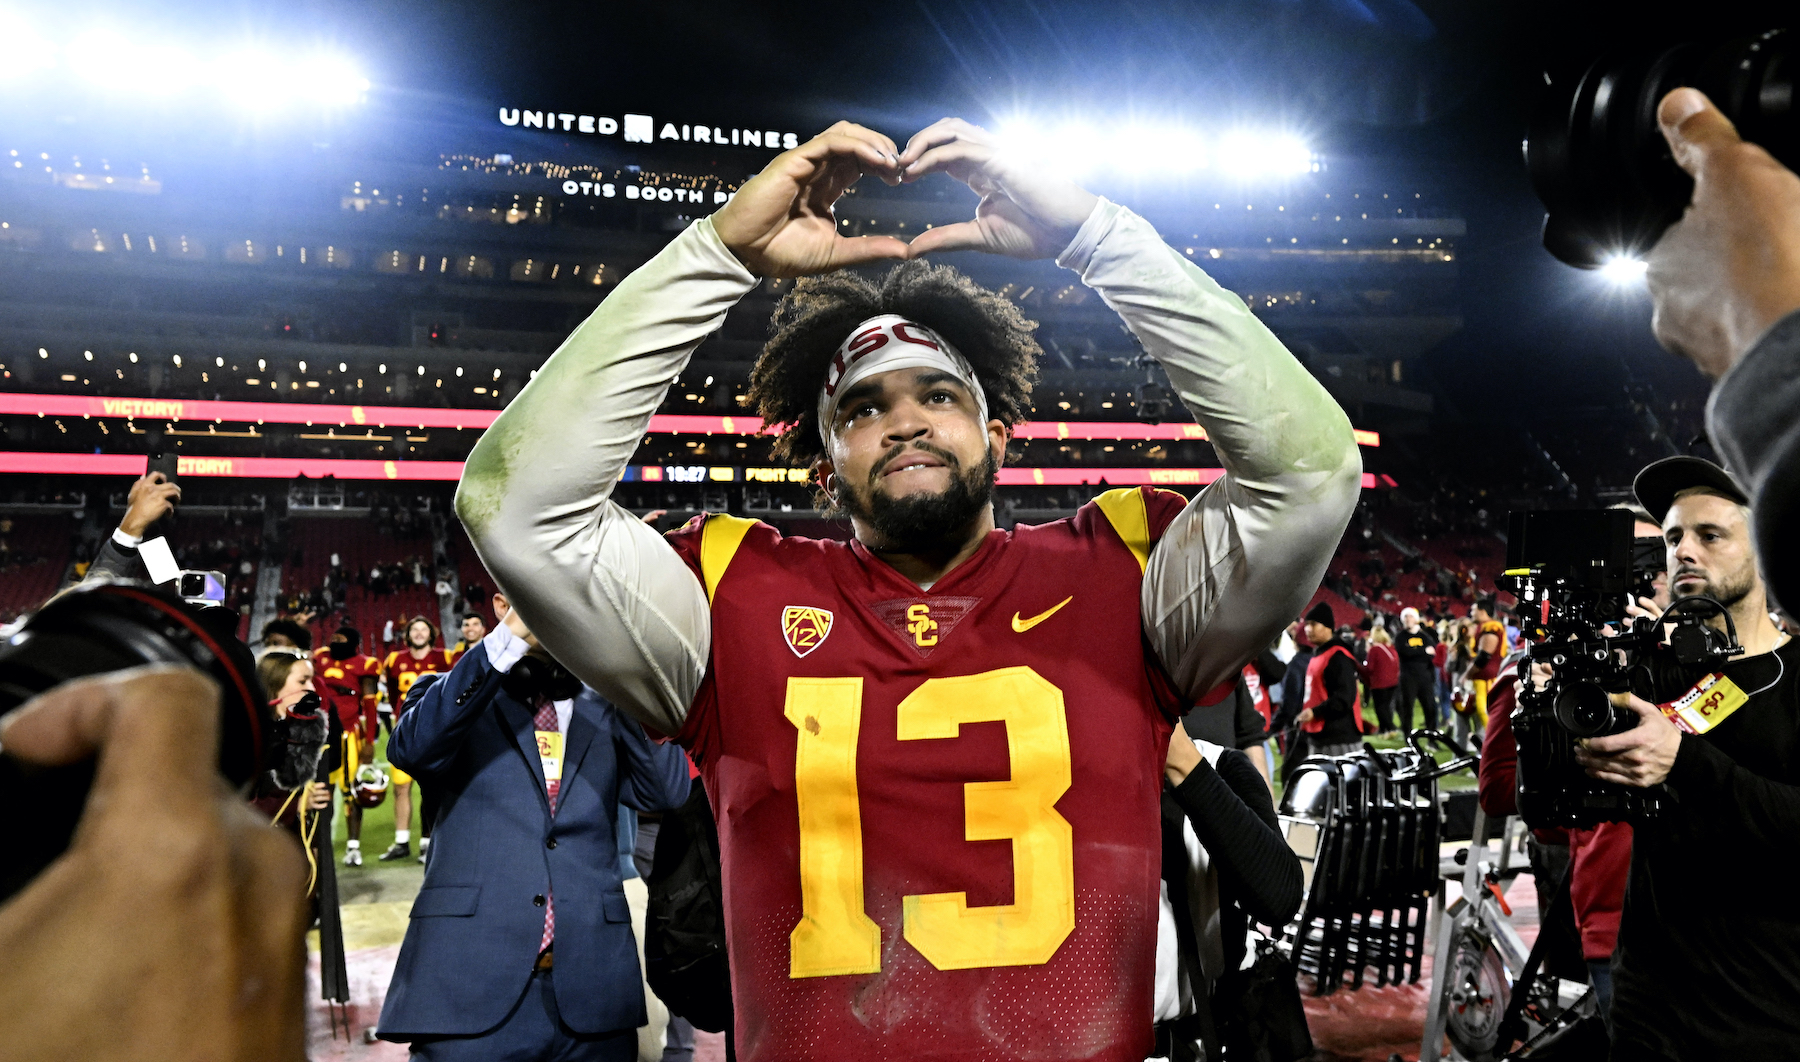 Quarterback Caleb Williams #13 of the USC Trojans celebrates USC Trojans defeated the Notre Dame Fighting Irish 38-27 during a NCAA football game at the Los Angeles Memorial Coliseum in Los Angeles on Saturday, November 26, 2022.